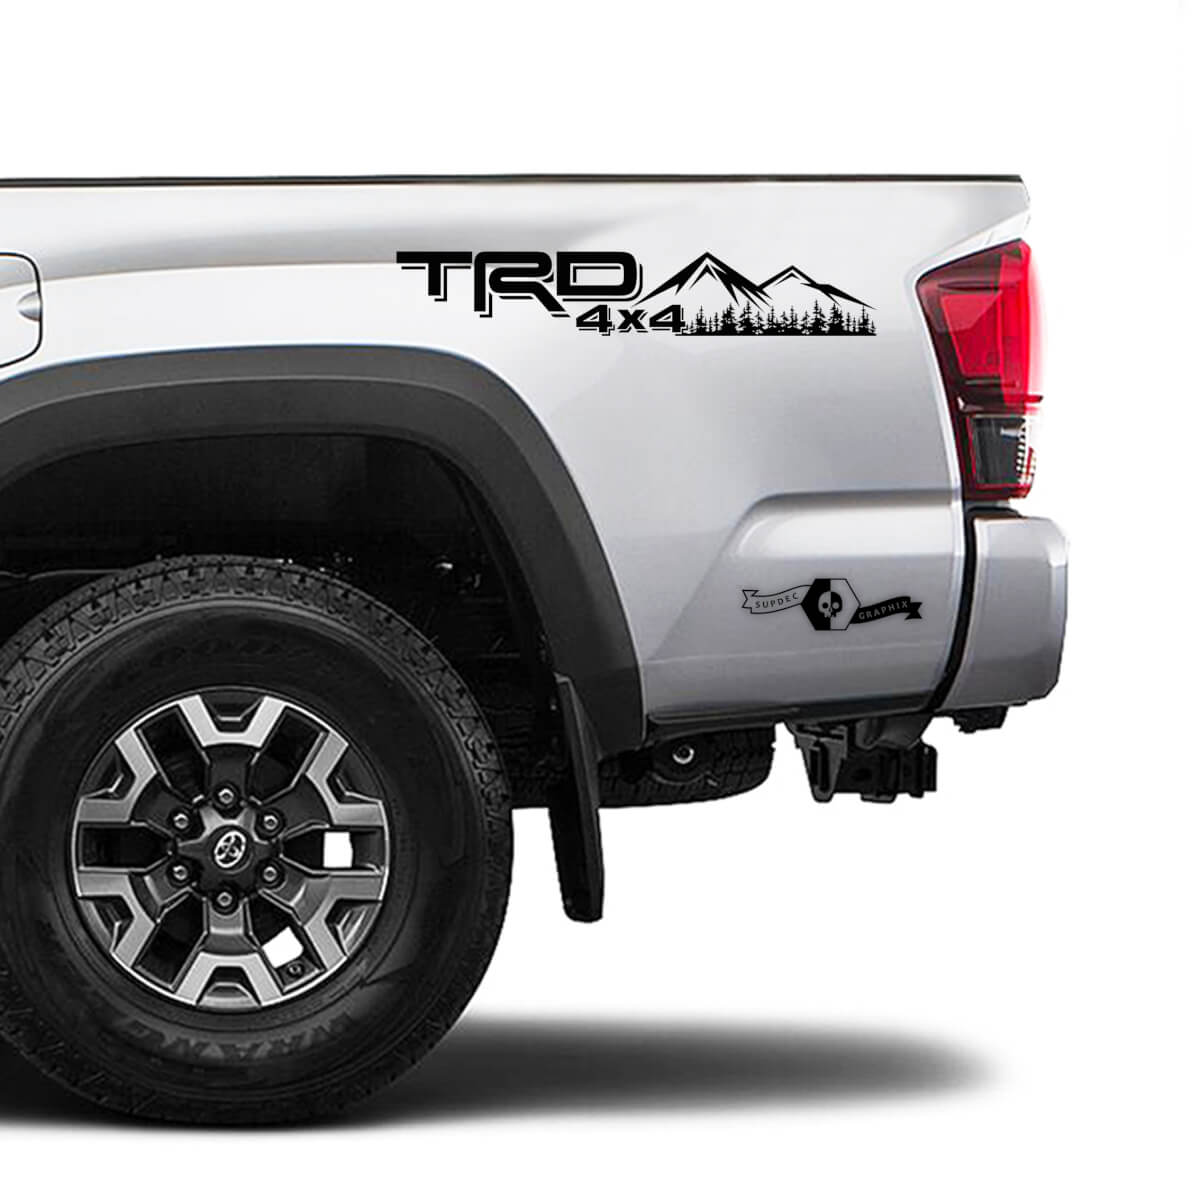 TRD 4x4 Off Road TOYOTA Field Forest Mountains Decals Stickers for Tacoma Tundra 4Runner Hilux side